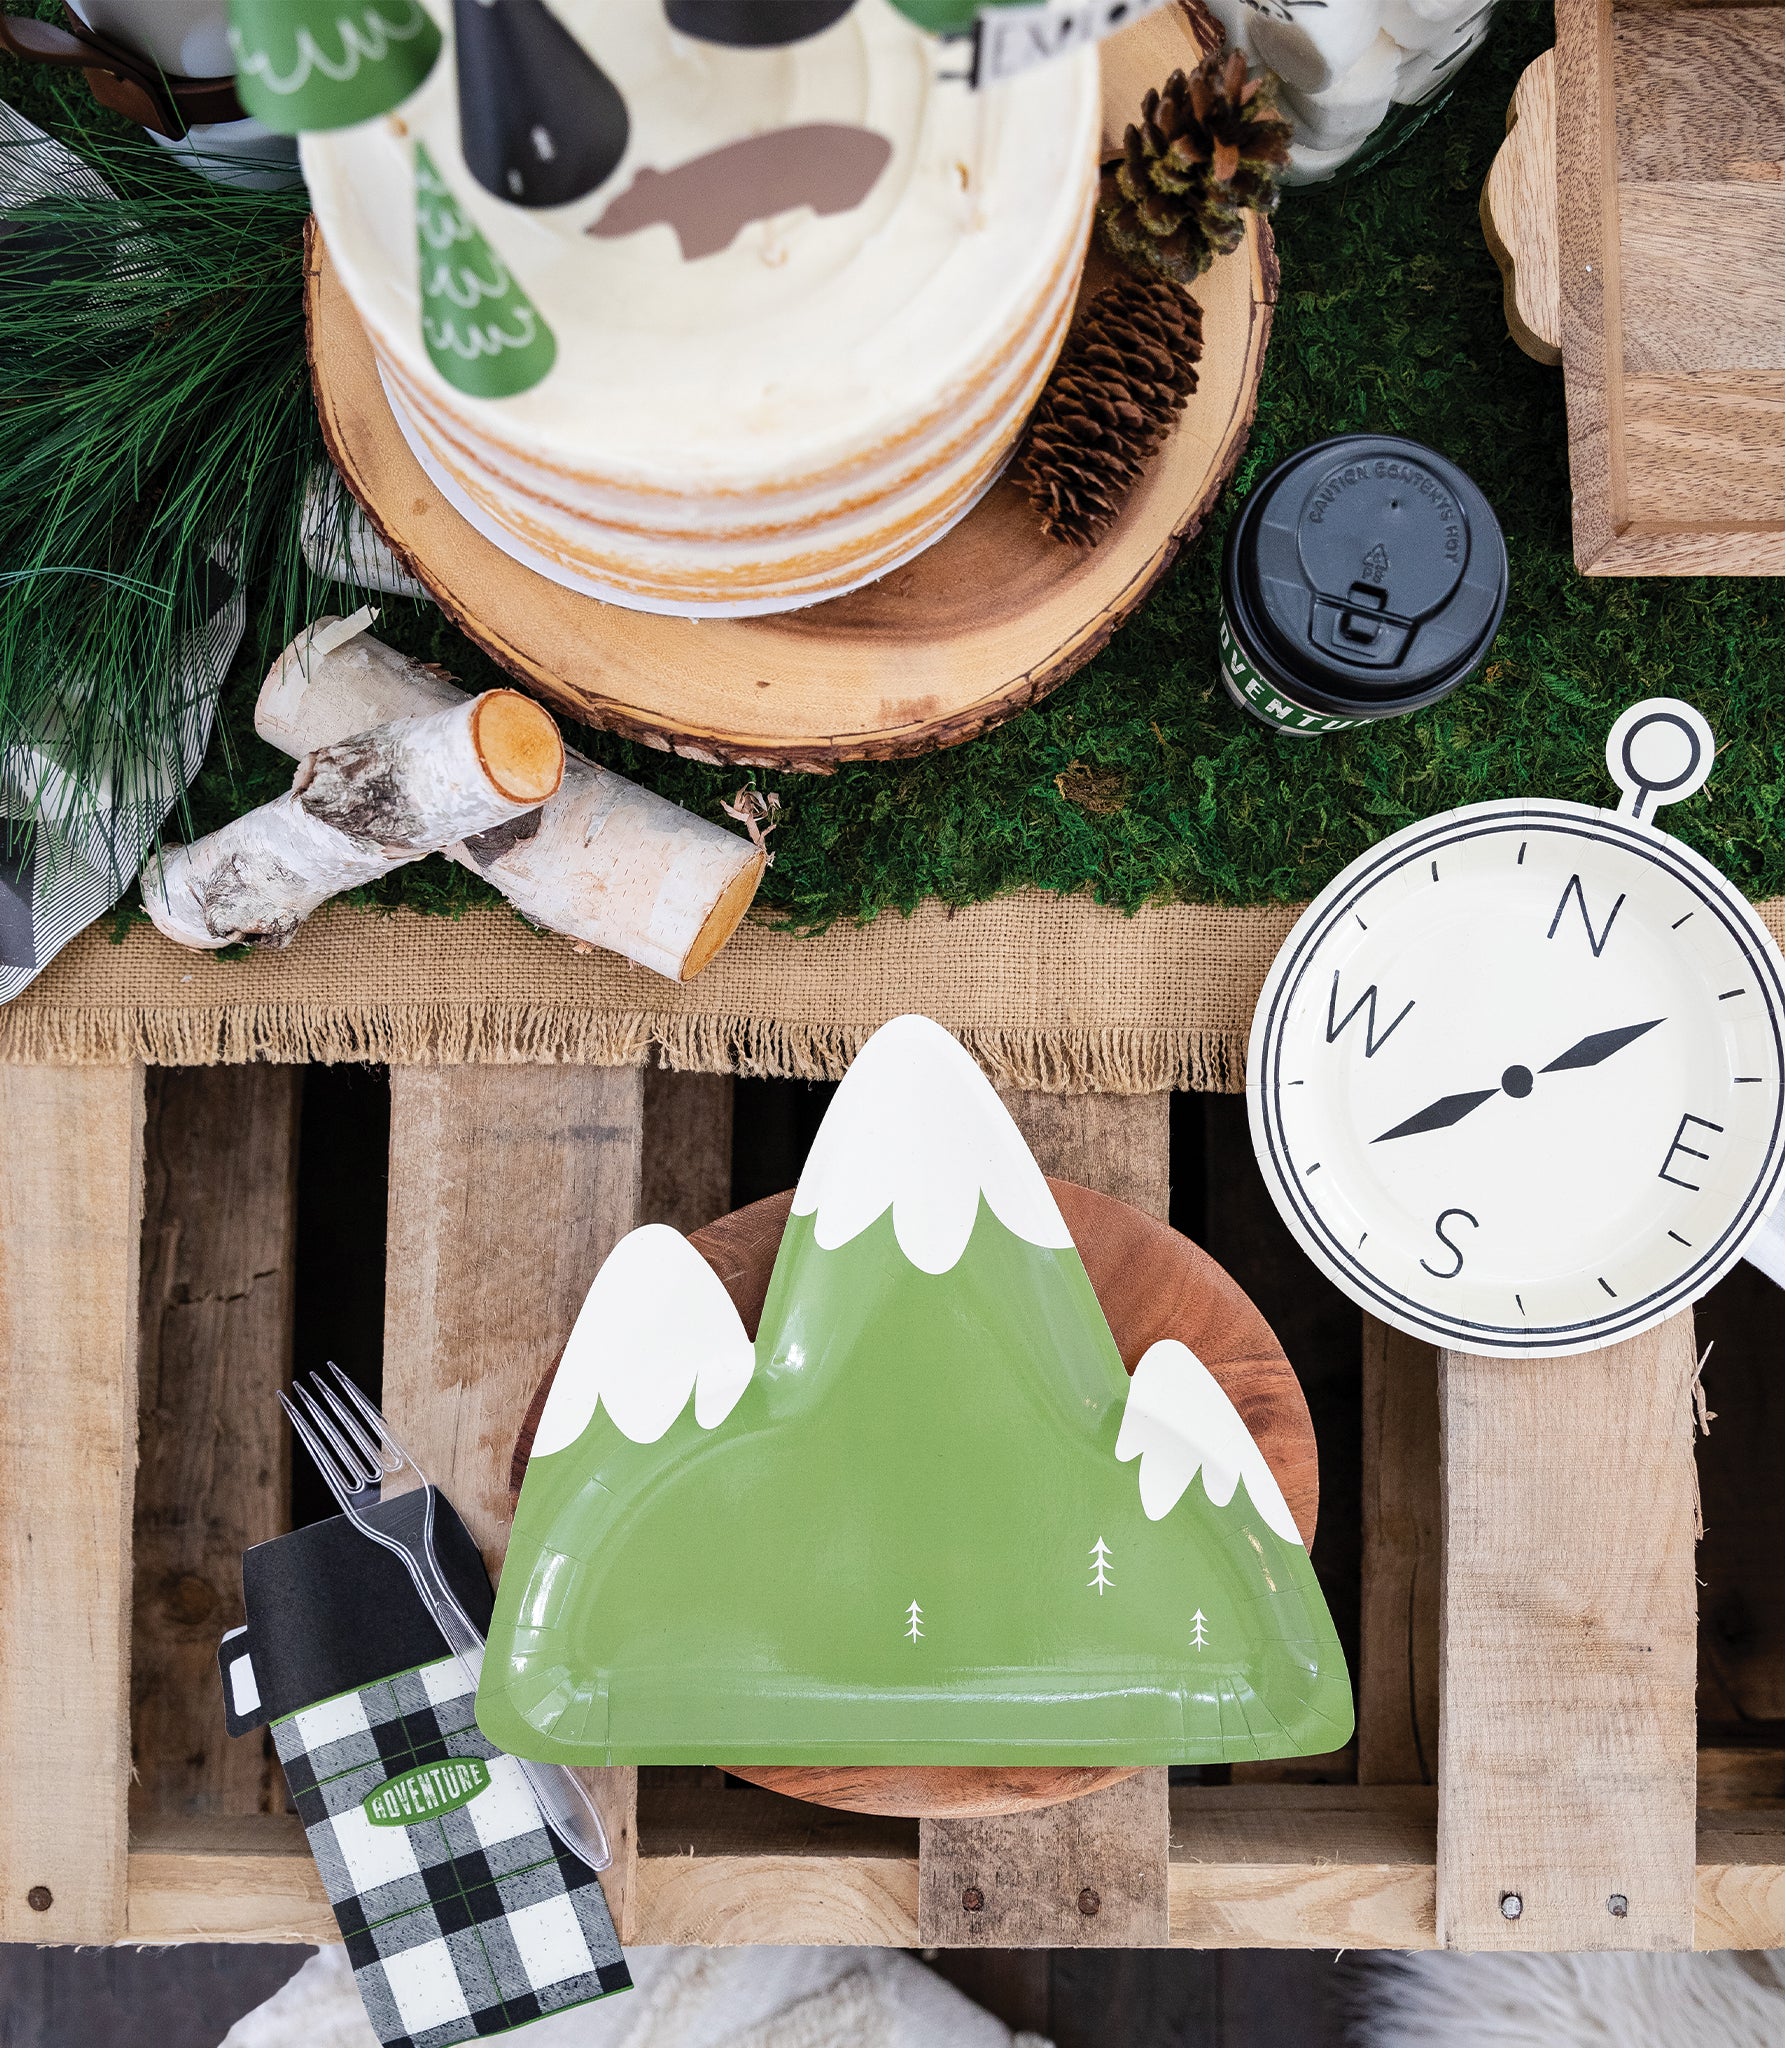 Adventure Mountain Shaped Party Plates